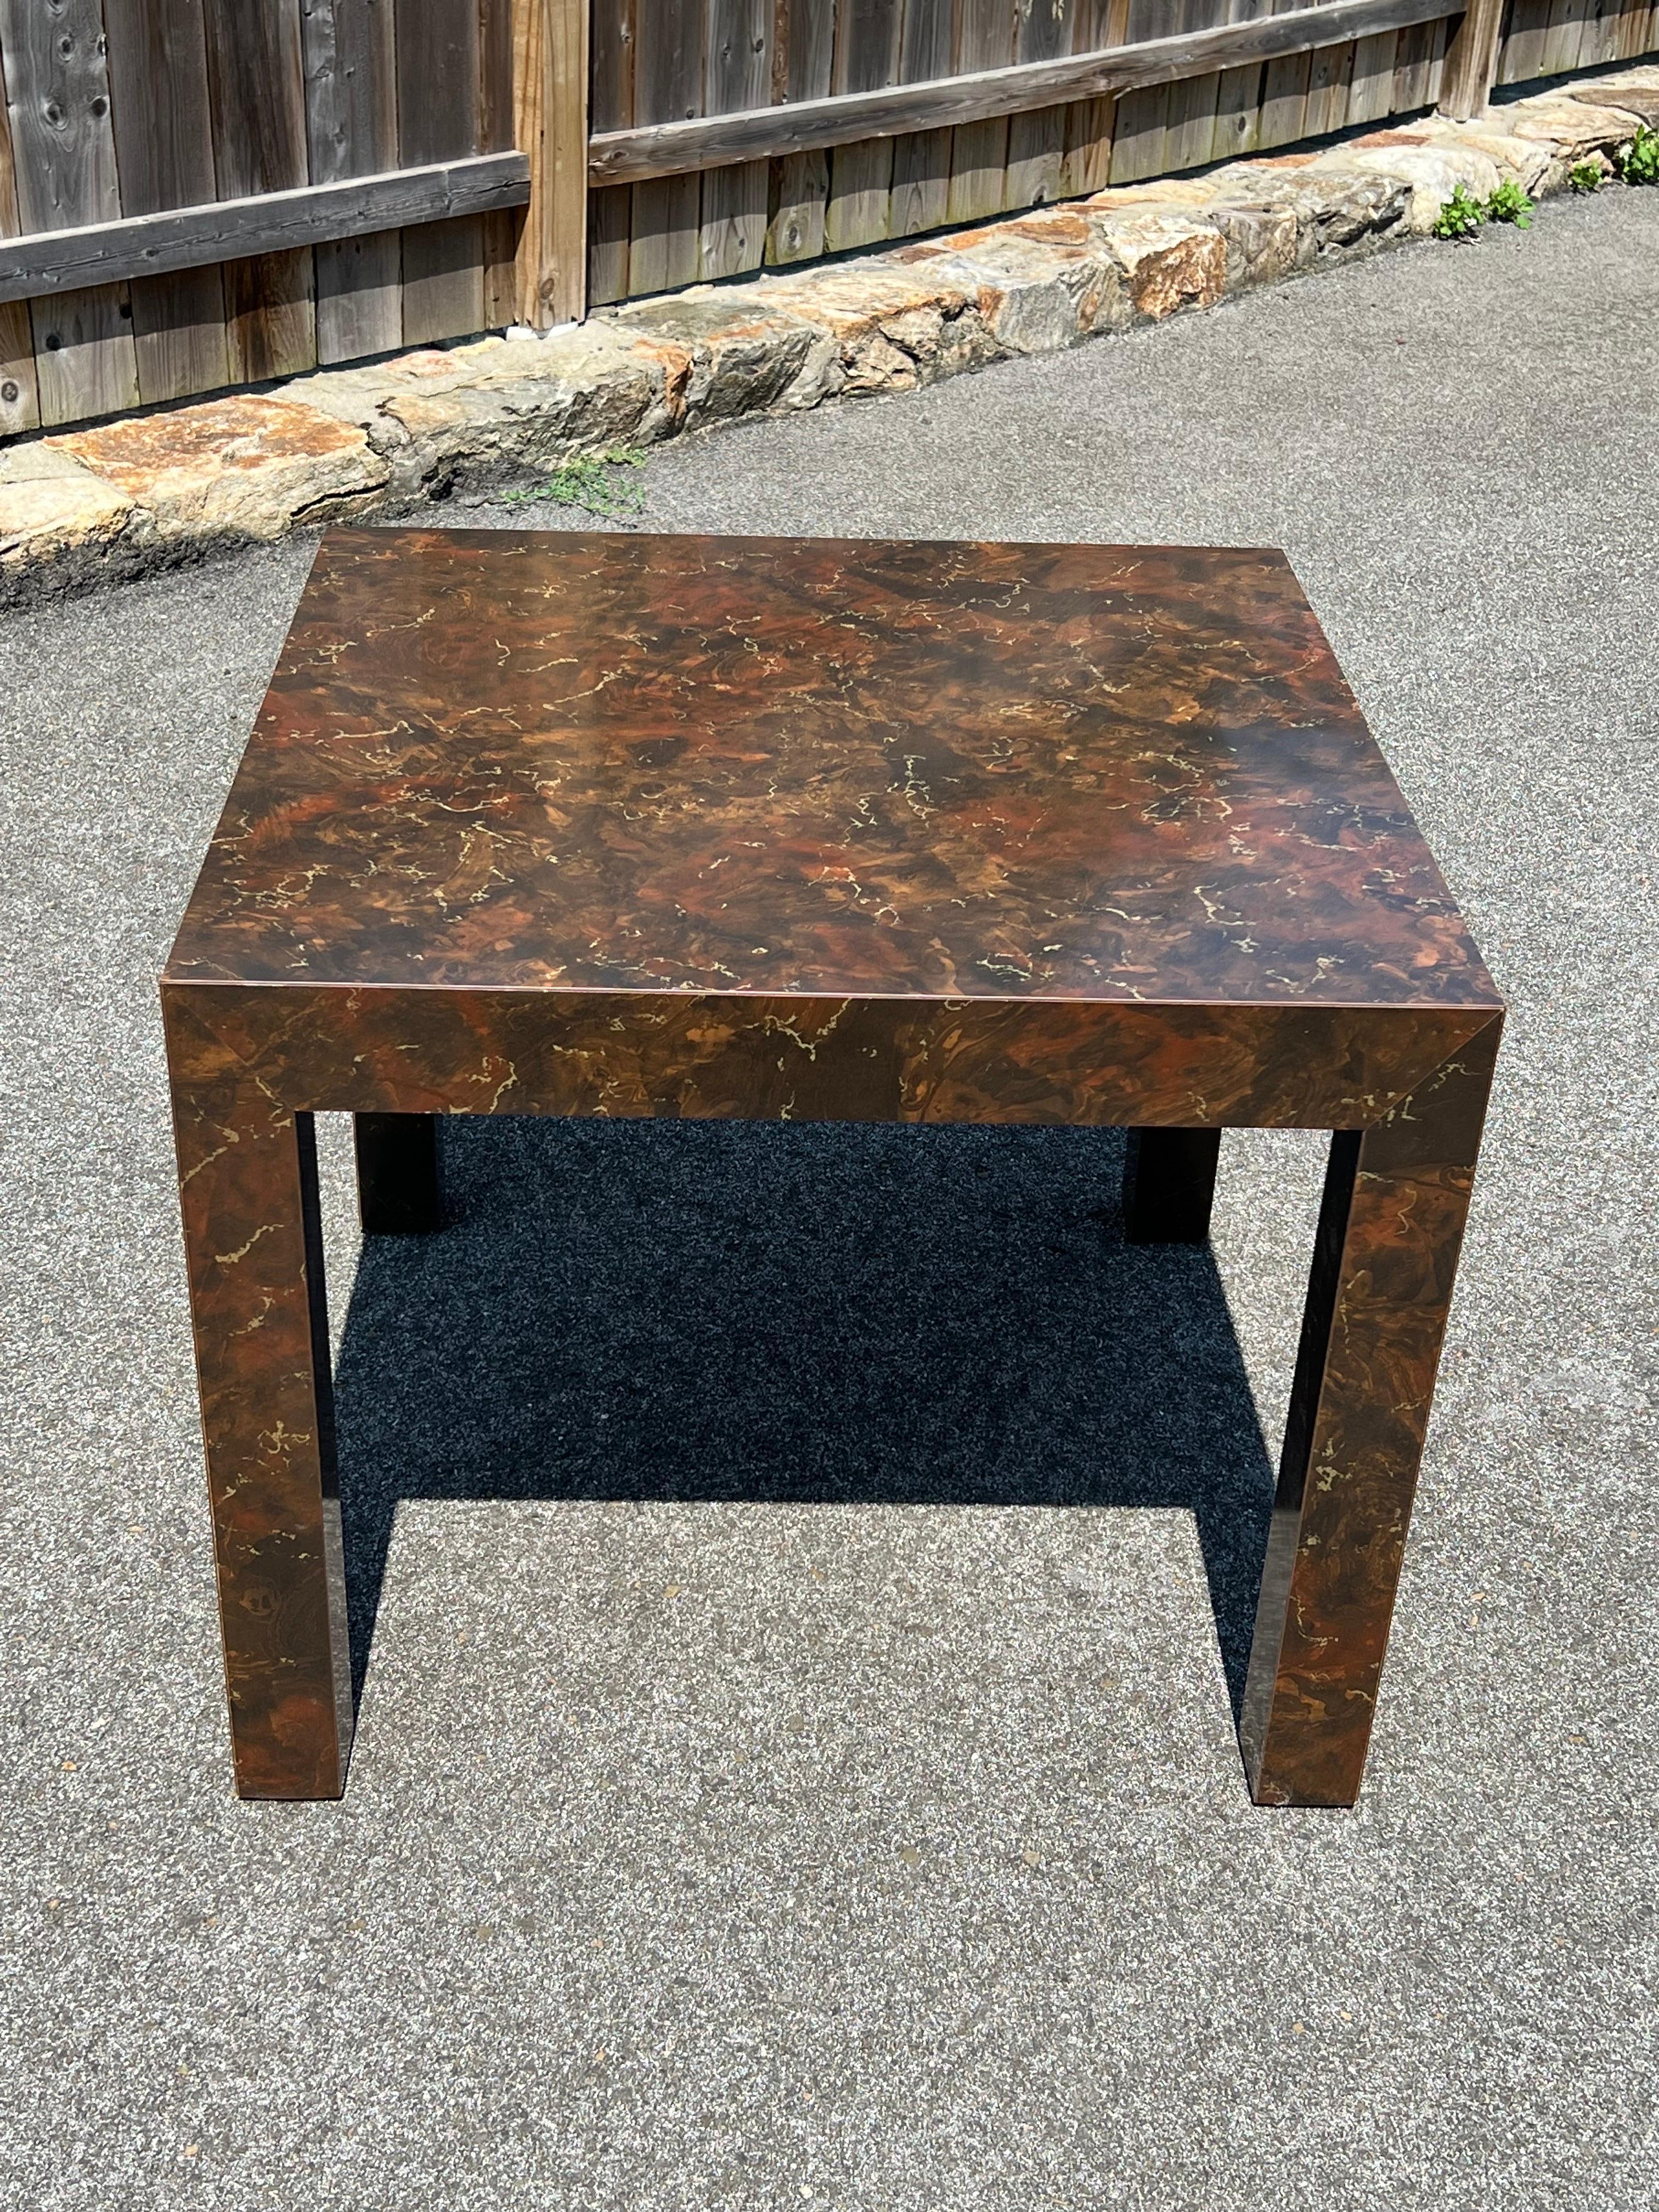 Post Modern Laminate Tortoiseshell End Table. Square table with earth tones of brown, gold and orange. Nice oversized size for a square space. This item can parcel ship economically. Matching sofa table, end table and coffee table are also available.